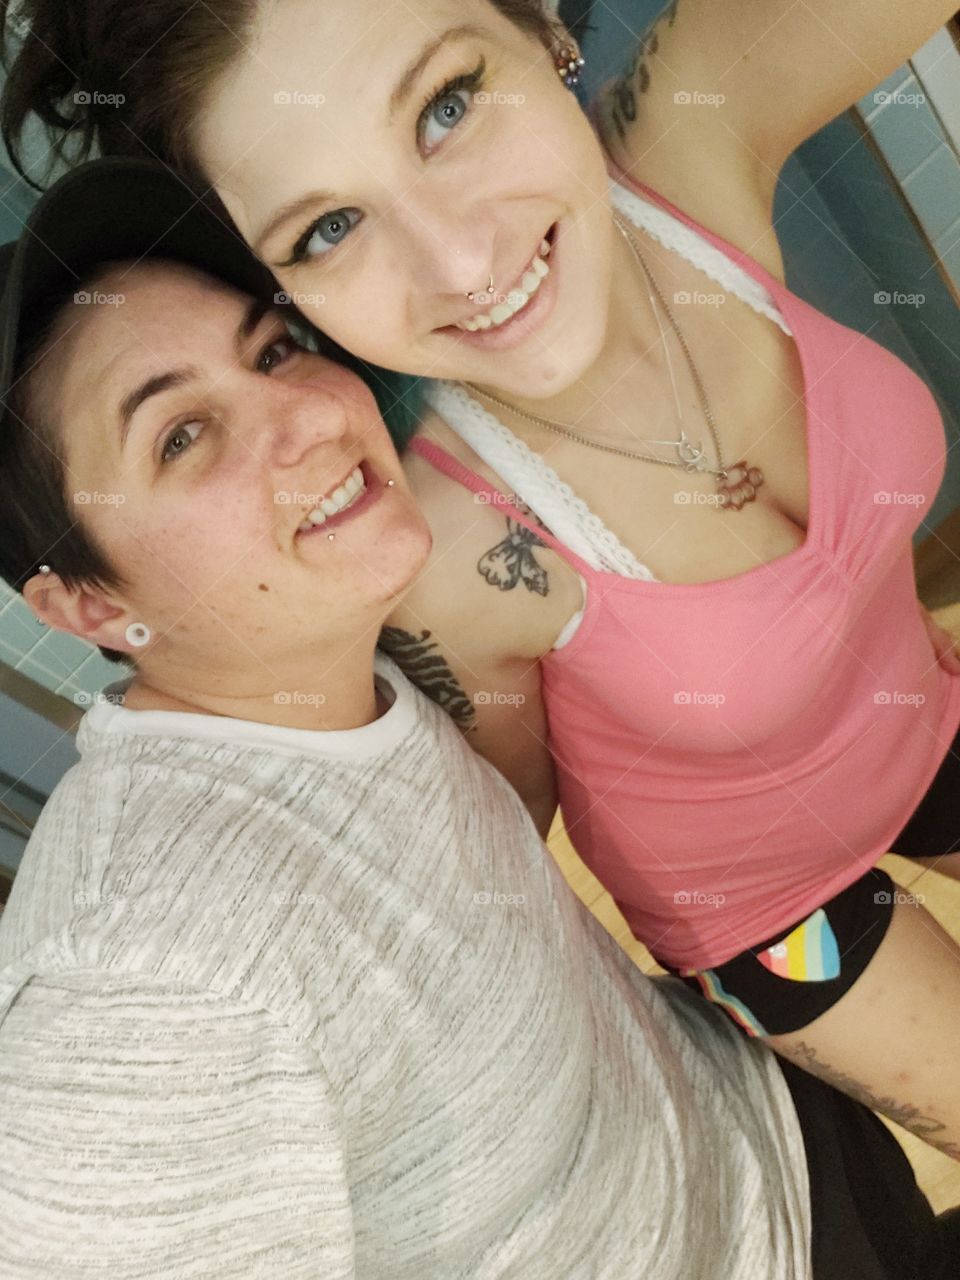 Me (lipstick lesbian in all pink) and my girlfriend Michelle in the public restroom on the cruise ship. I did get jumped for my sexuality the last night. nothing happened.